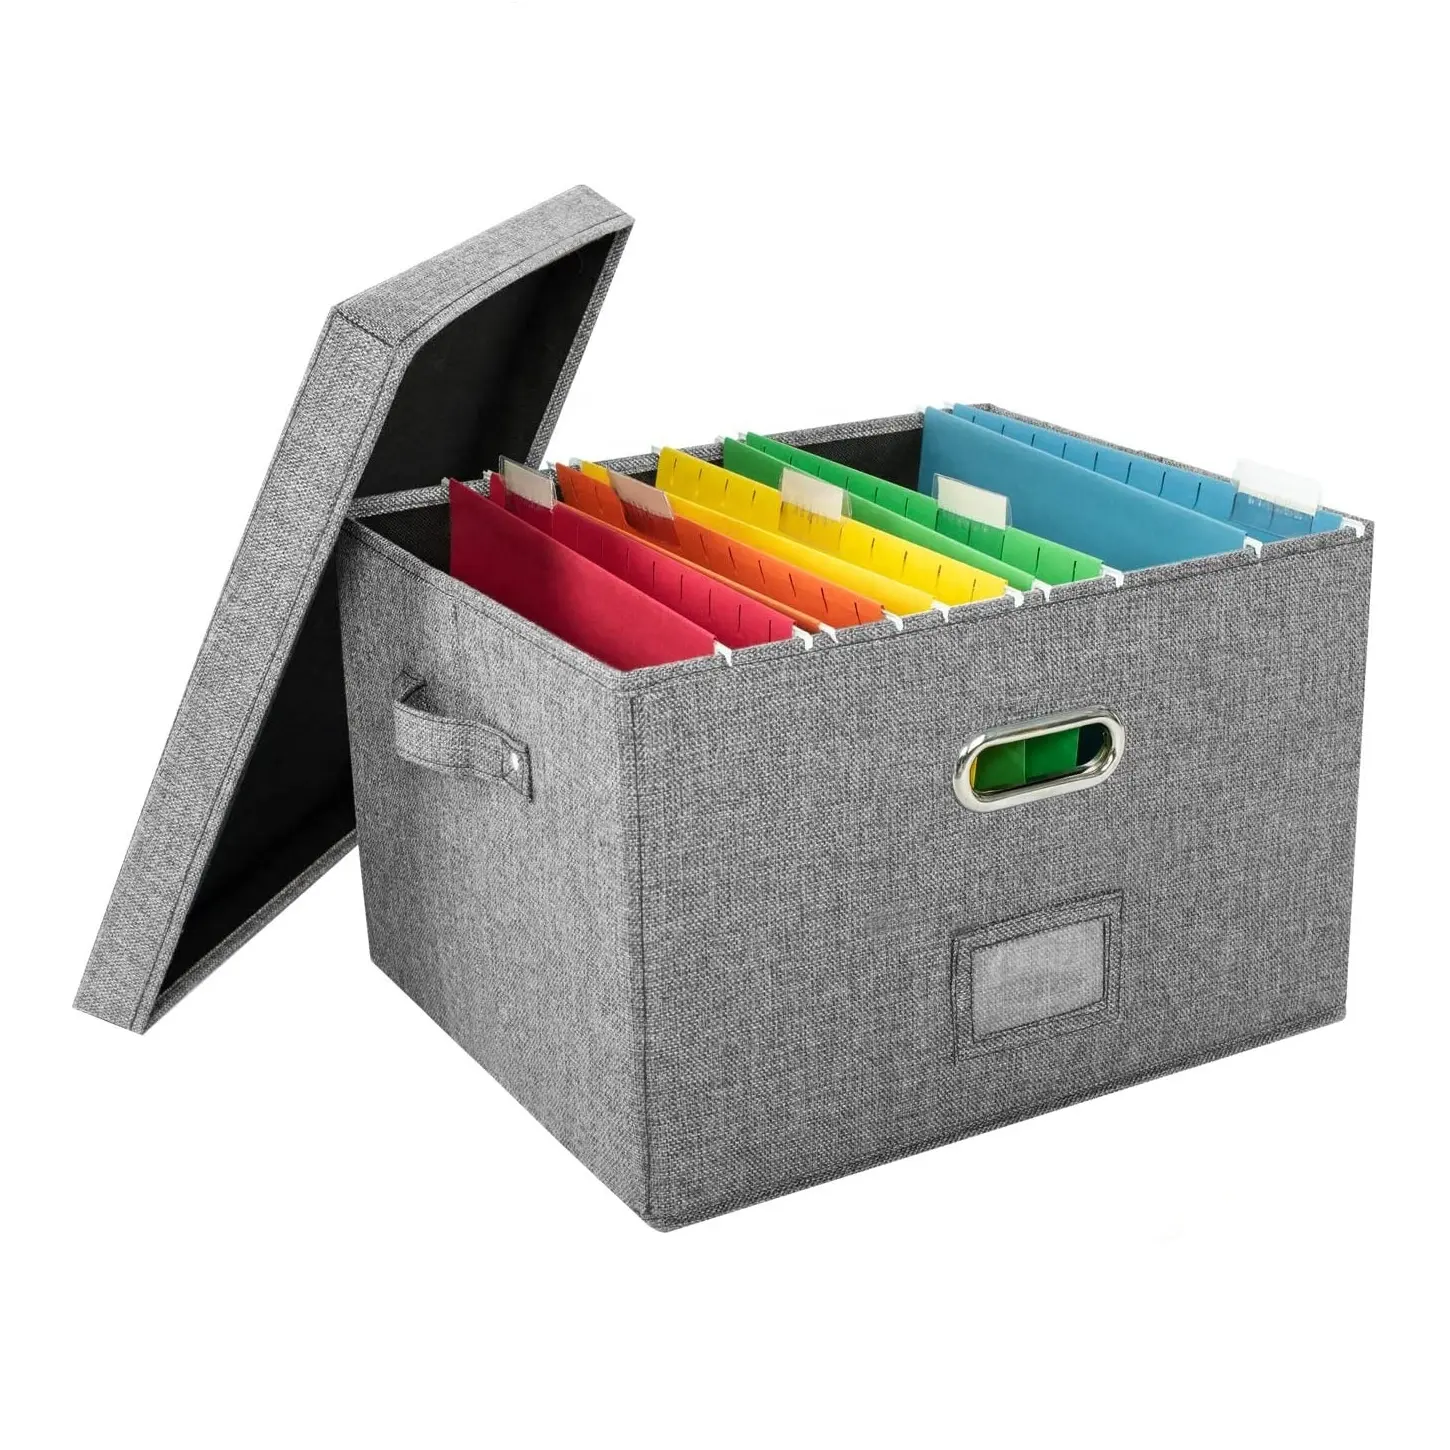 File Organizer Box Office Document Storage with Lid, Collapsible Linen Hanging Filing Organization,Portable Storage with Handle